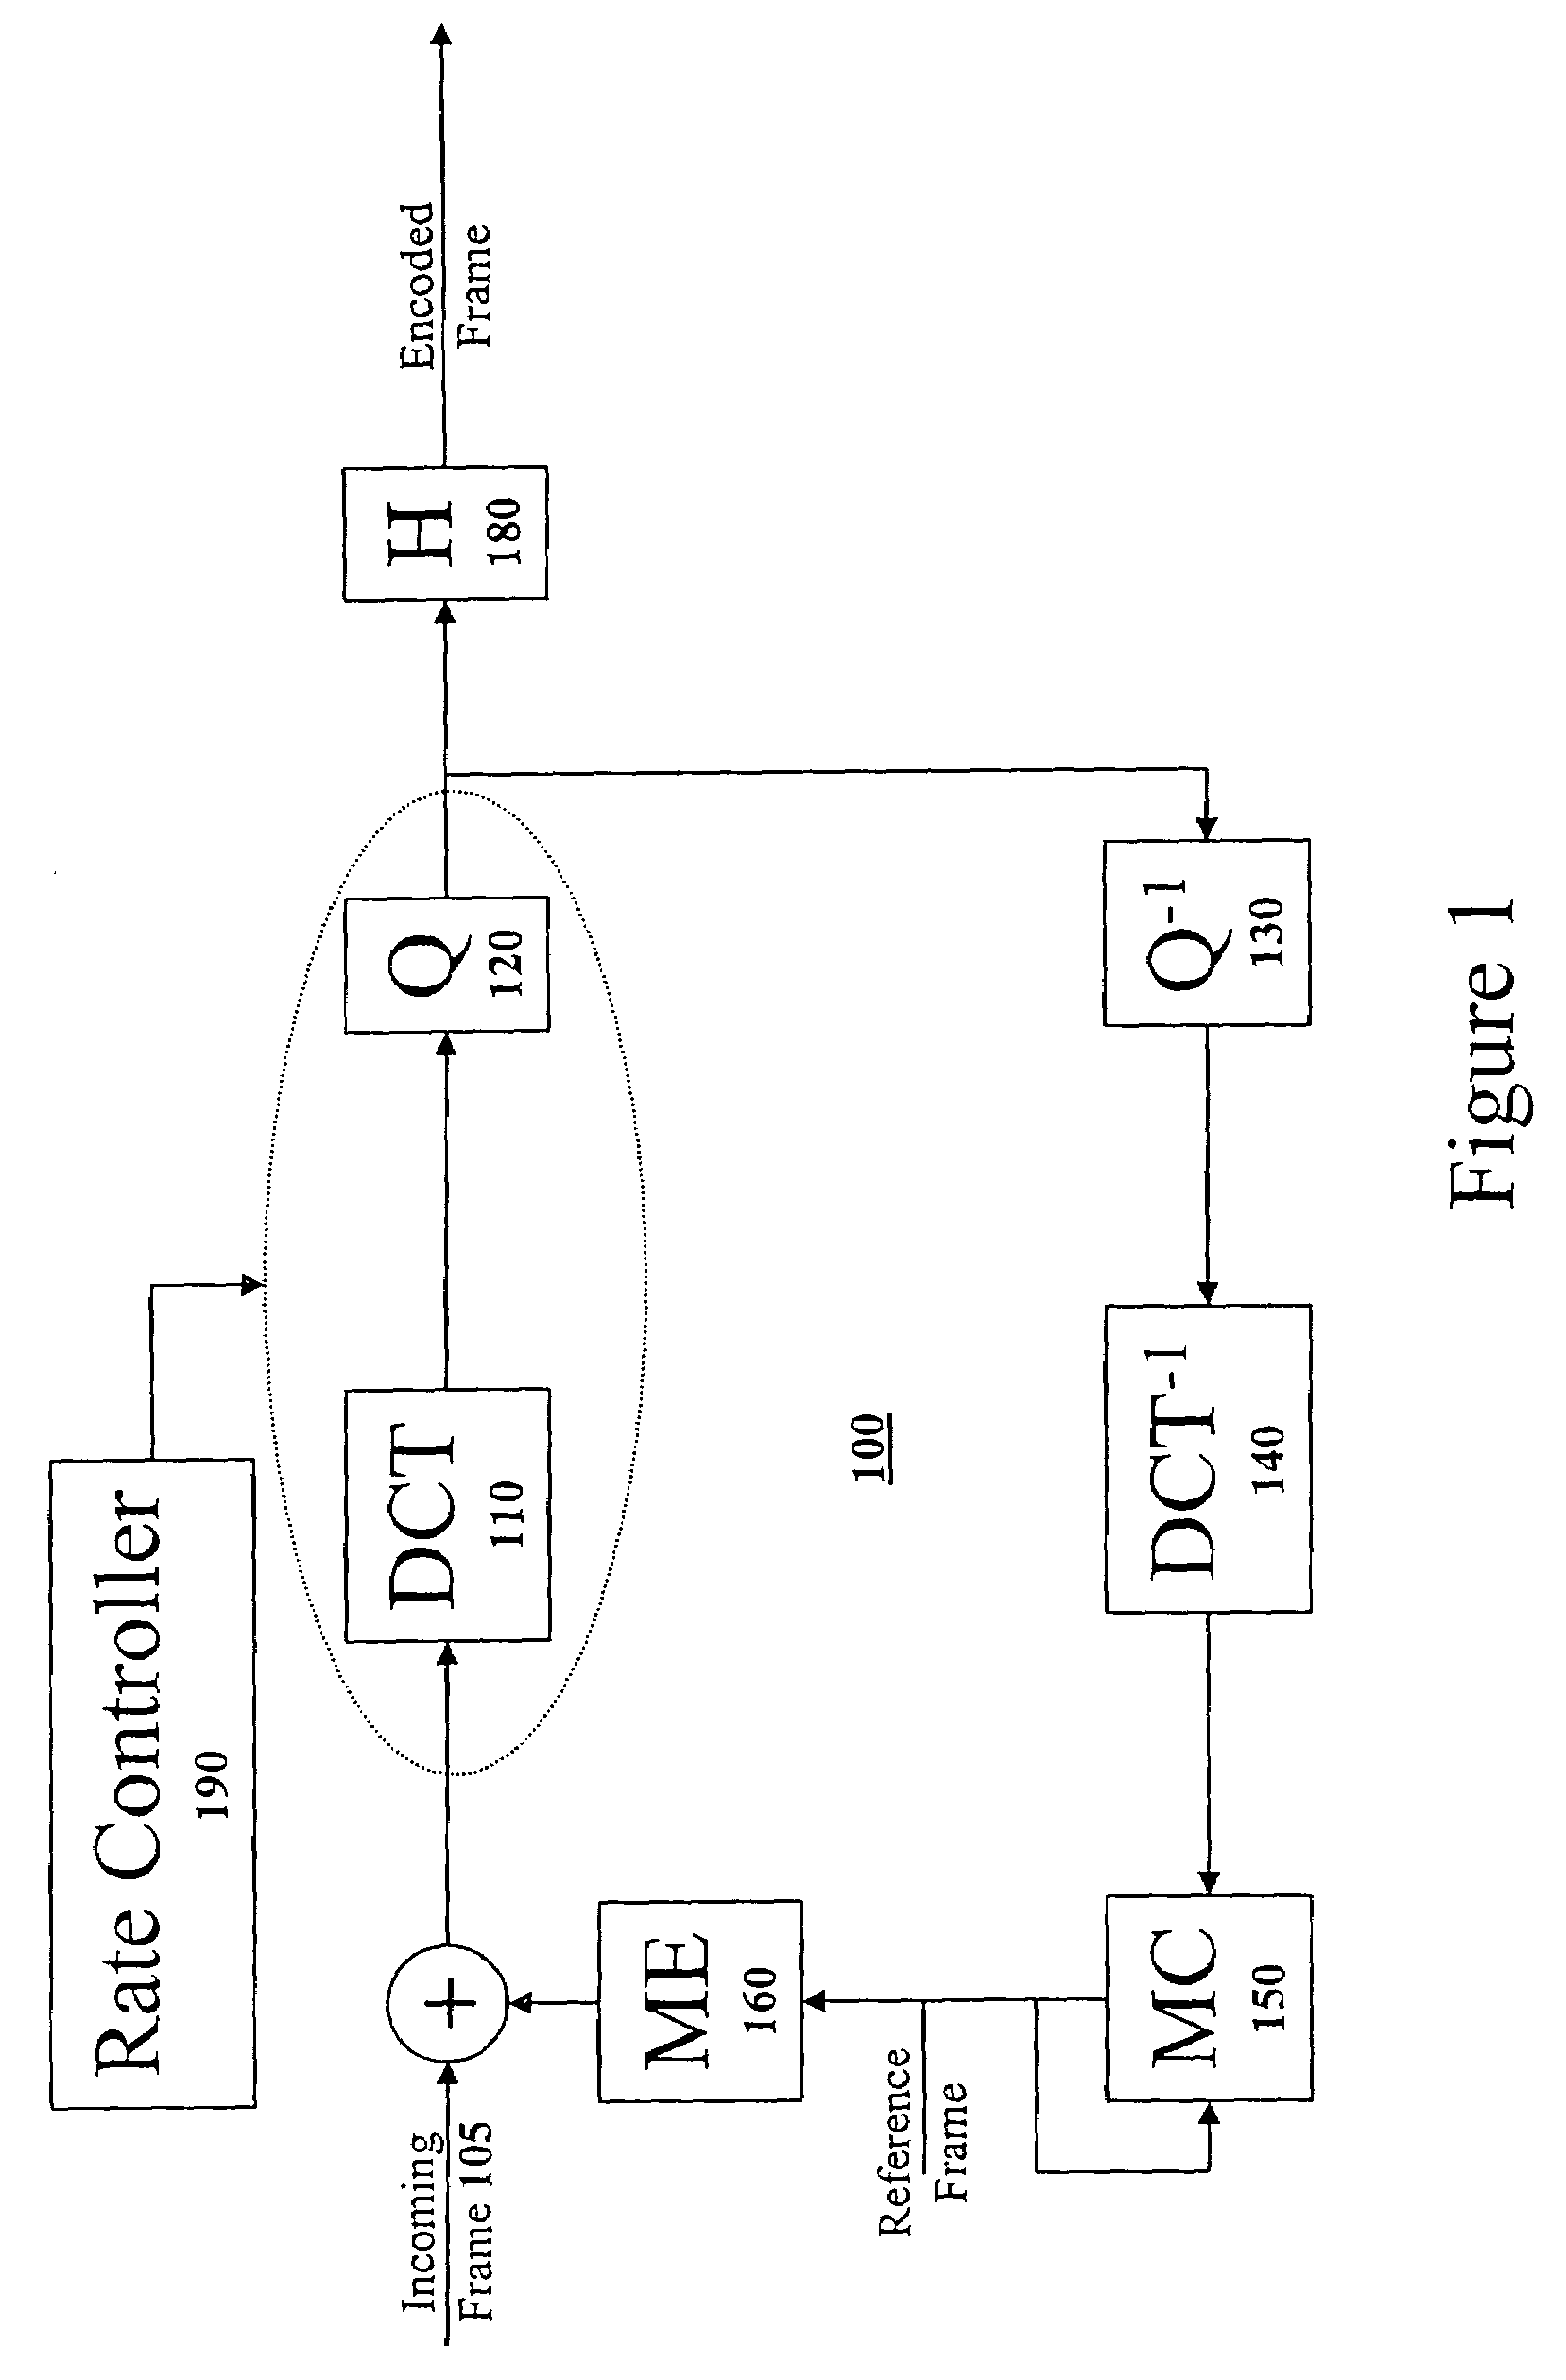 Method and apparatus for variable accuracy inter-picture timing specification for digital video encoding with reduced requirements of division operations